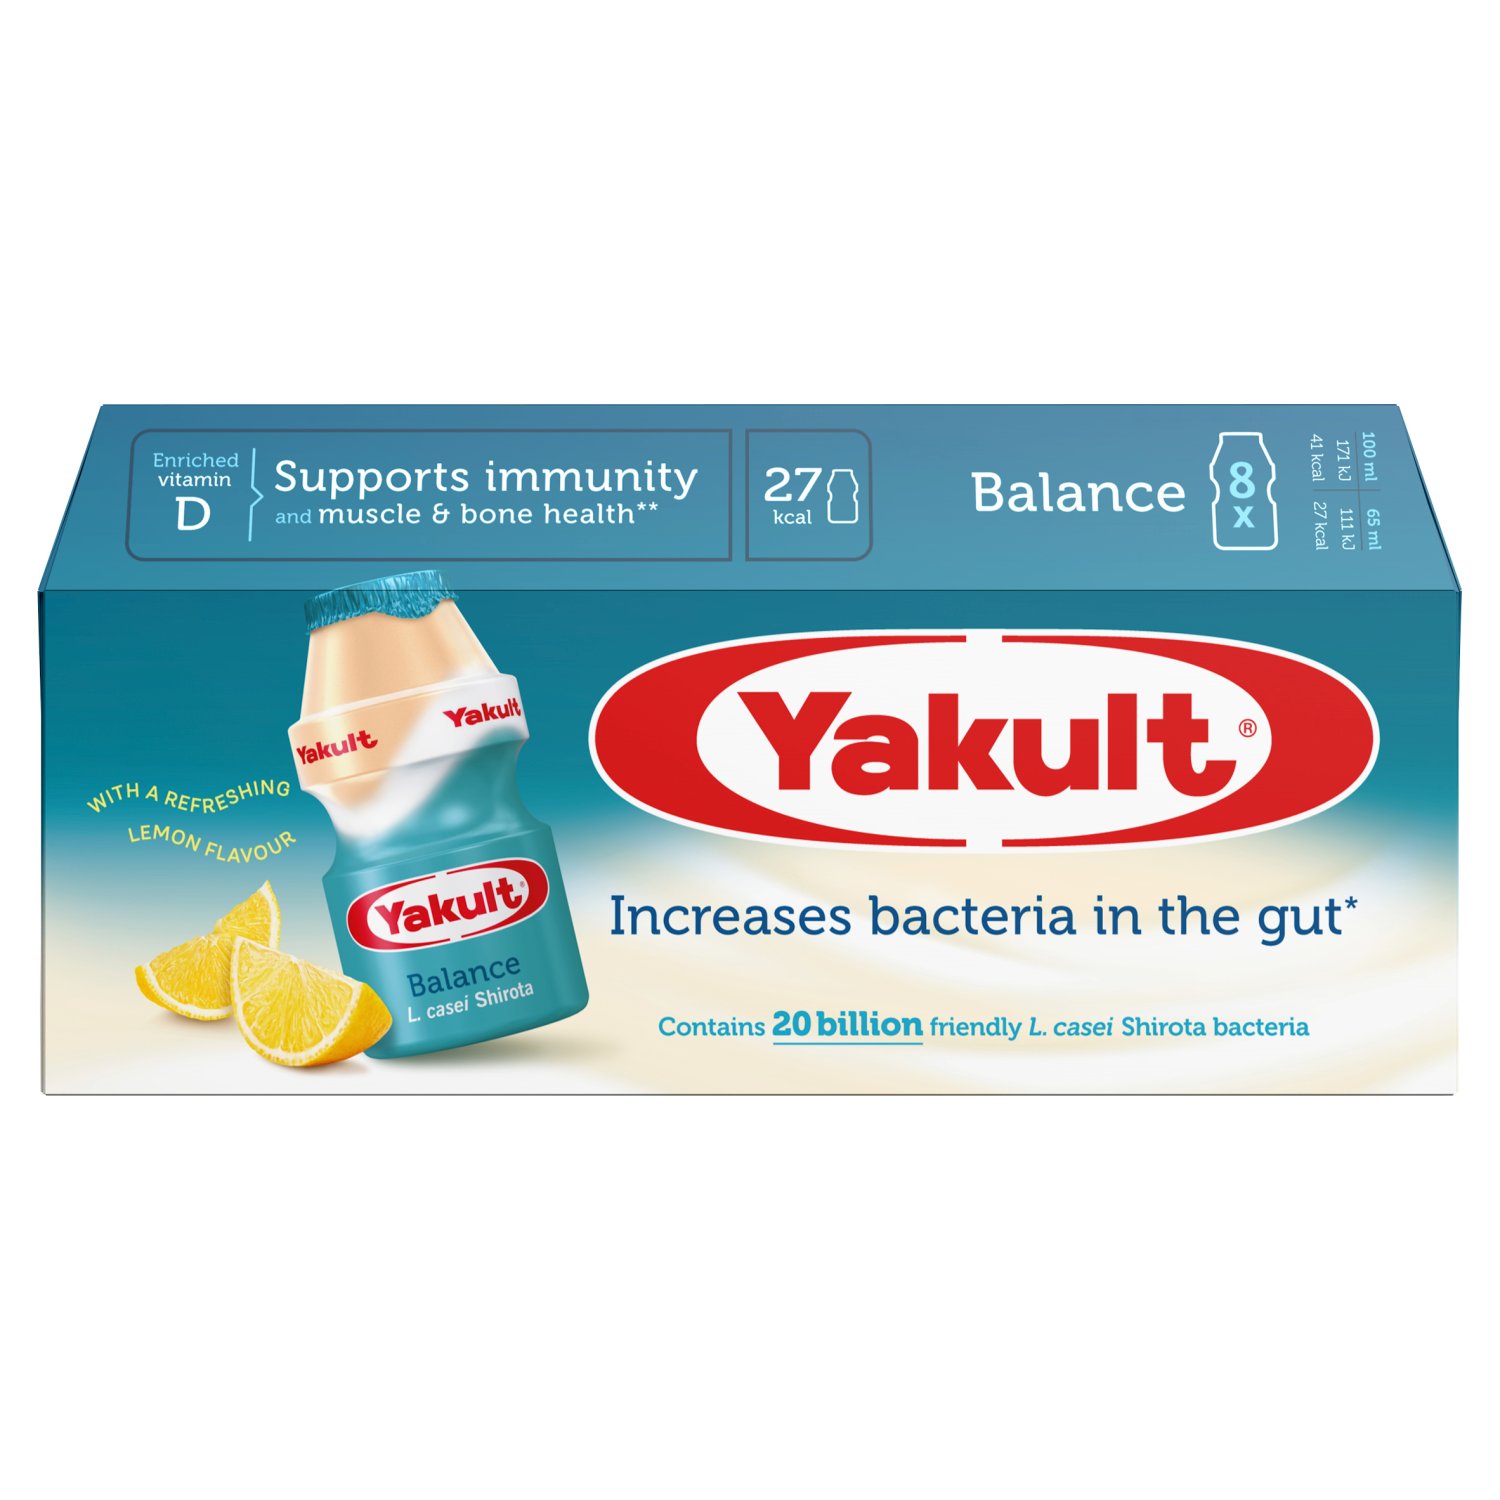 Enriched vitamin D supports immunity and muscle & bone health** 
** Vitamin D contributes to the normal function of the immune system and the maintenance of normal bones and muscle function. Each bottle of Yakult balance accounts for 15% of the EU reference intake for vitamin D.

Yakult balance contains 20 billion L. casei Shirota. These friendly bacteria are scientifically proven to reach the gut alive and increase the bacteria in the gut!*
*L. casei Shirota bacteria increase both the lactobacilli and bifidobacteria in the gut

Fewer Calories and reduced sugar***
*** Yakult balance contains 67% less sugar and 37% fewer calories than Yakult original.